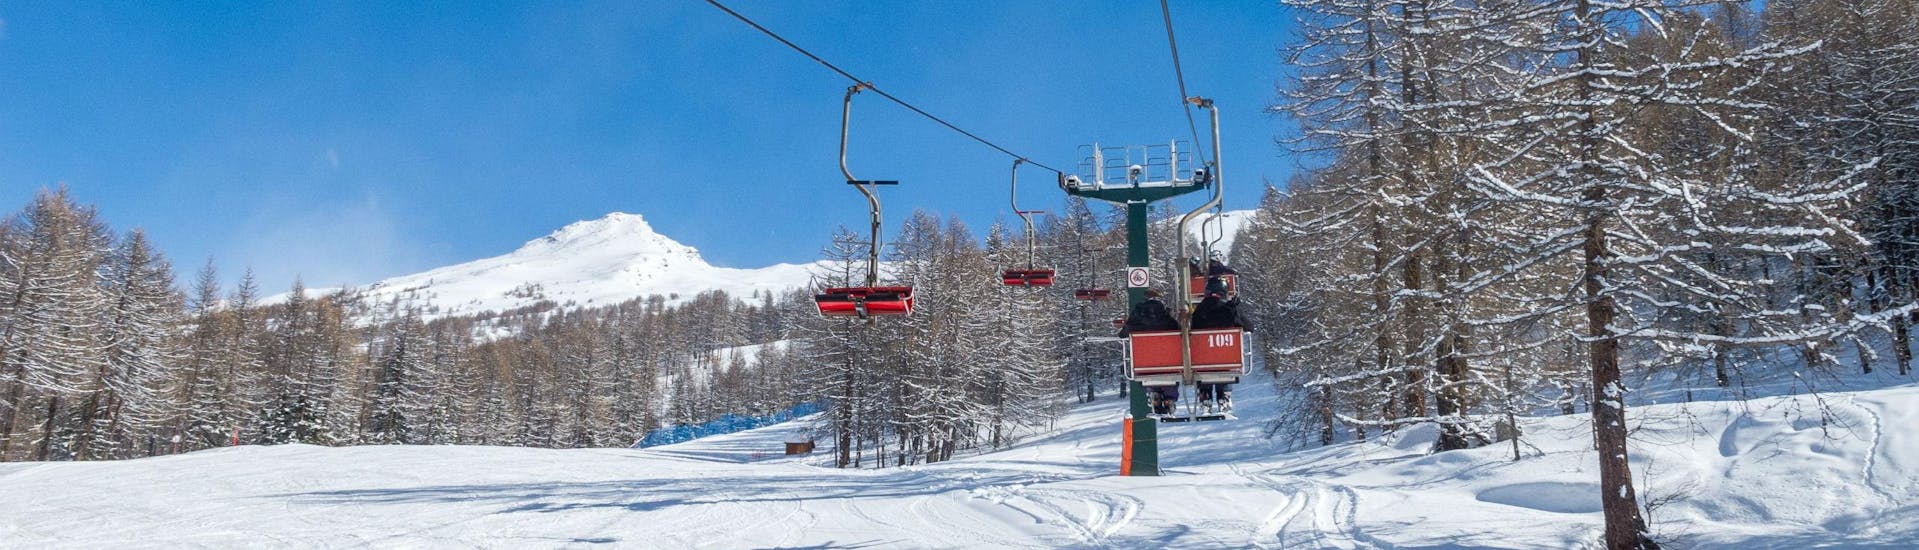 View of a ski lift transporting skiers up to the top of the mountain in the ski resort of Bardonecchia, where local ski schools offer a broad selection of ski lessons.